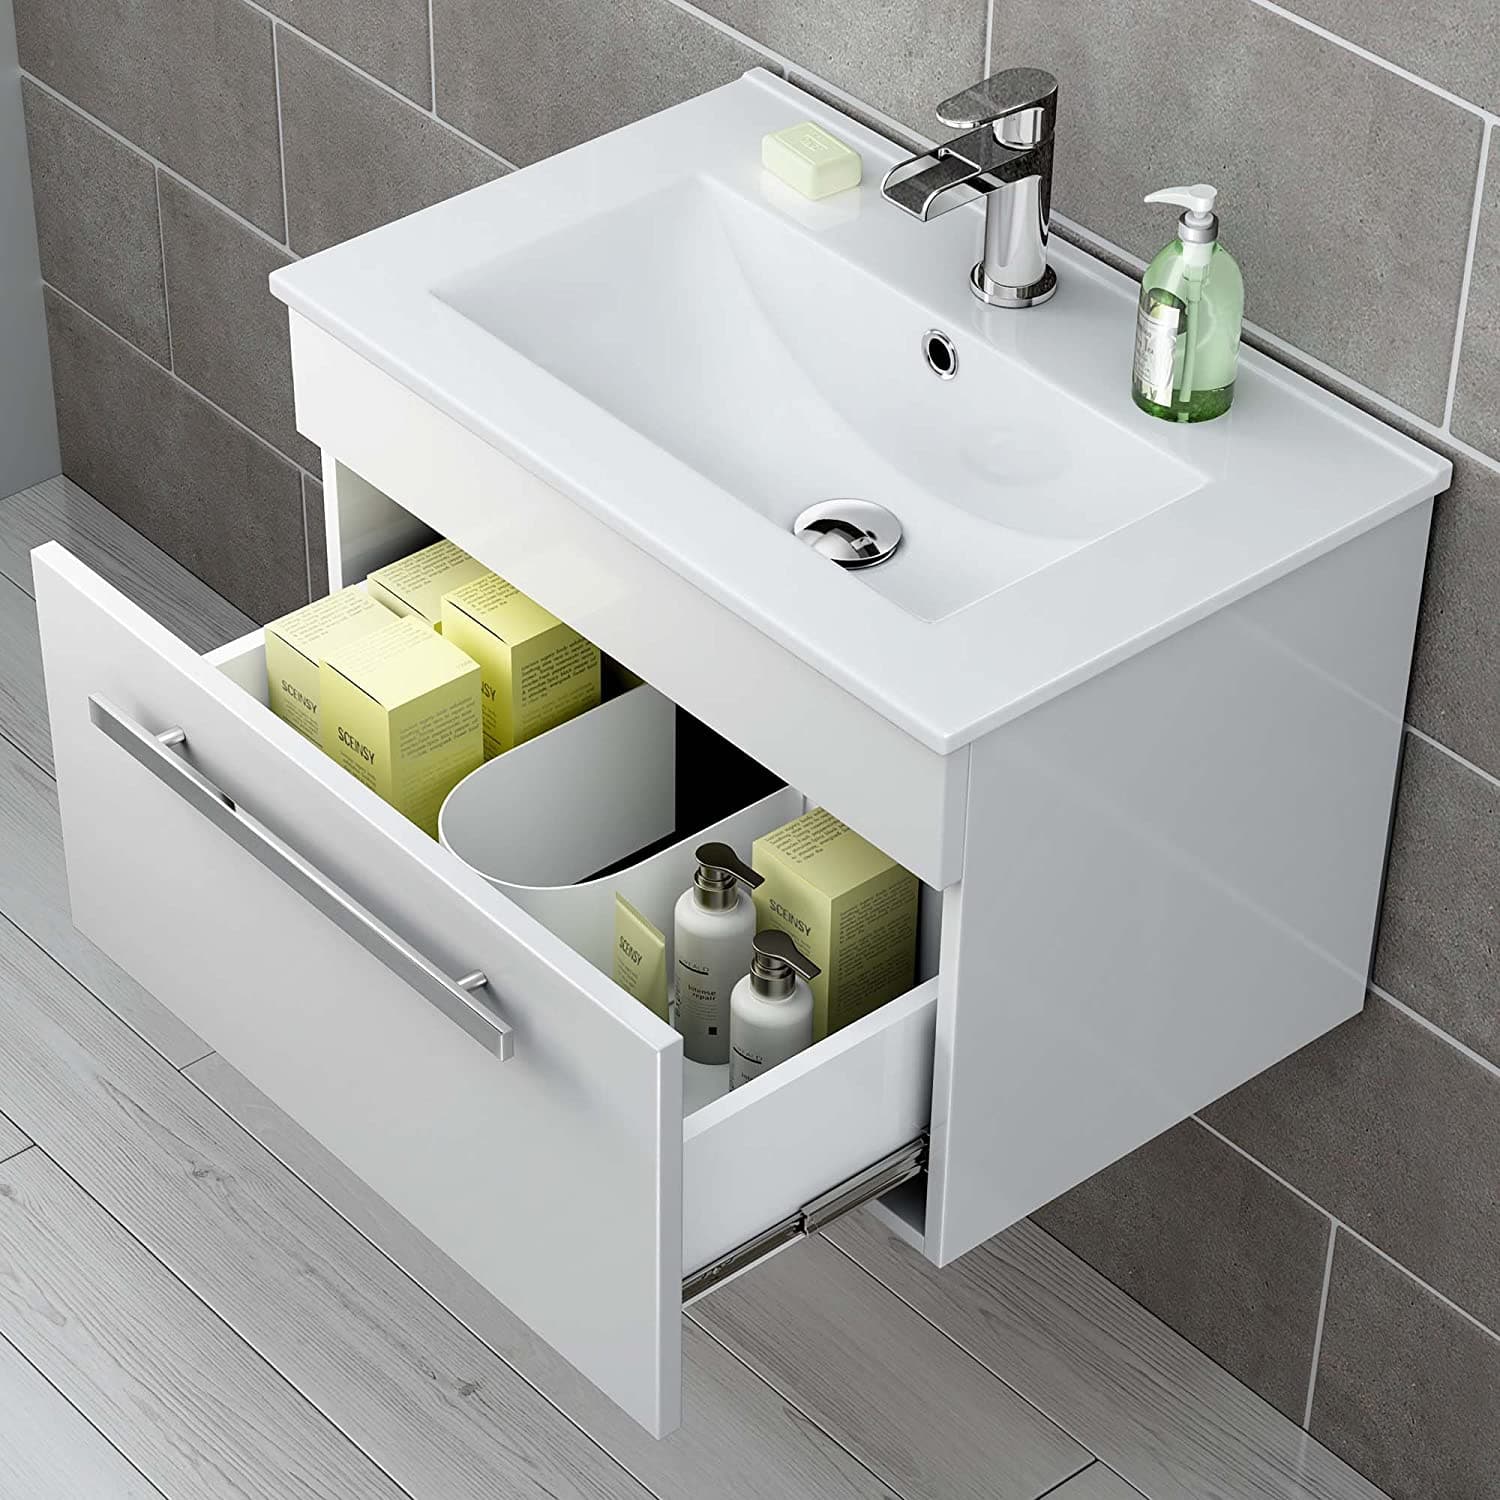 Avon 1 Drawer Wall Hung Vanity Unit With Basin - 615mm x 415mm - 1 Tap Hole